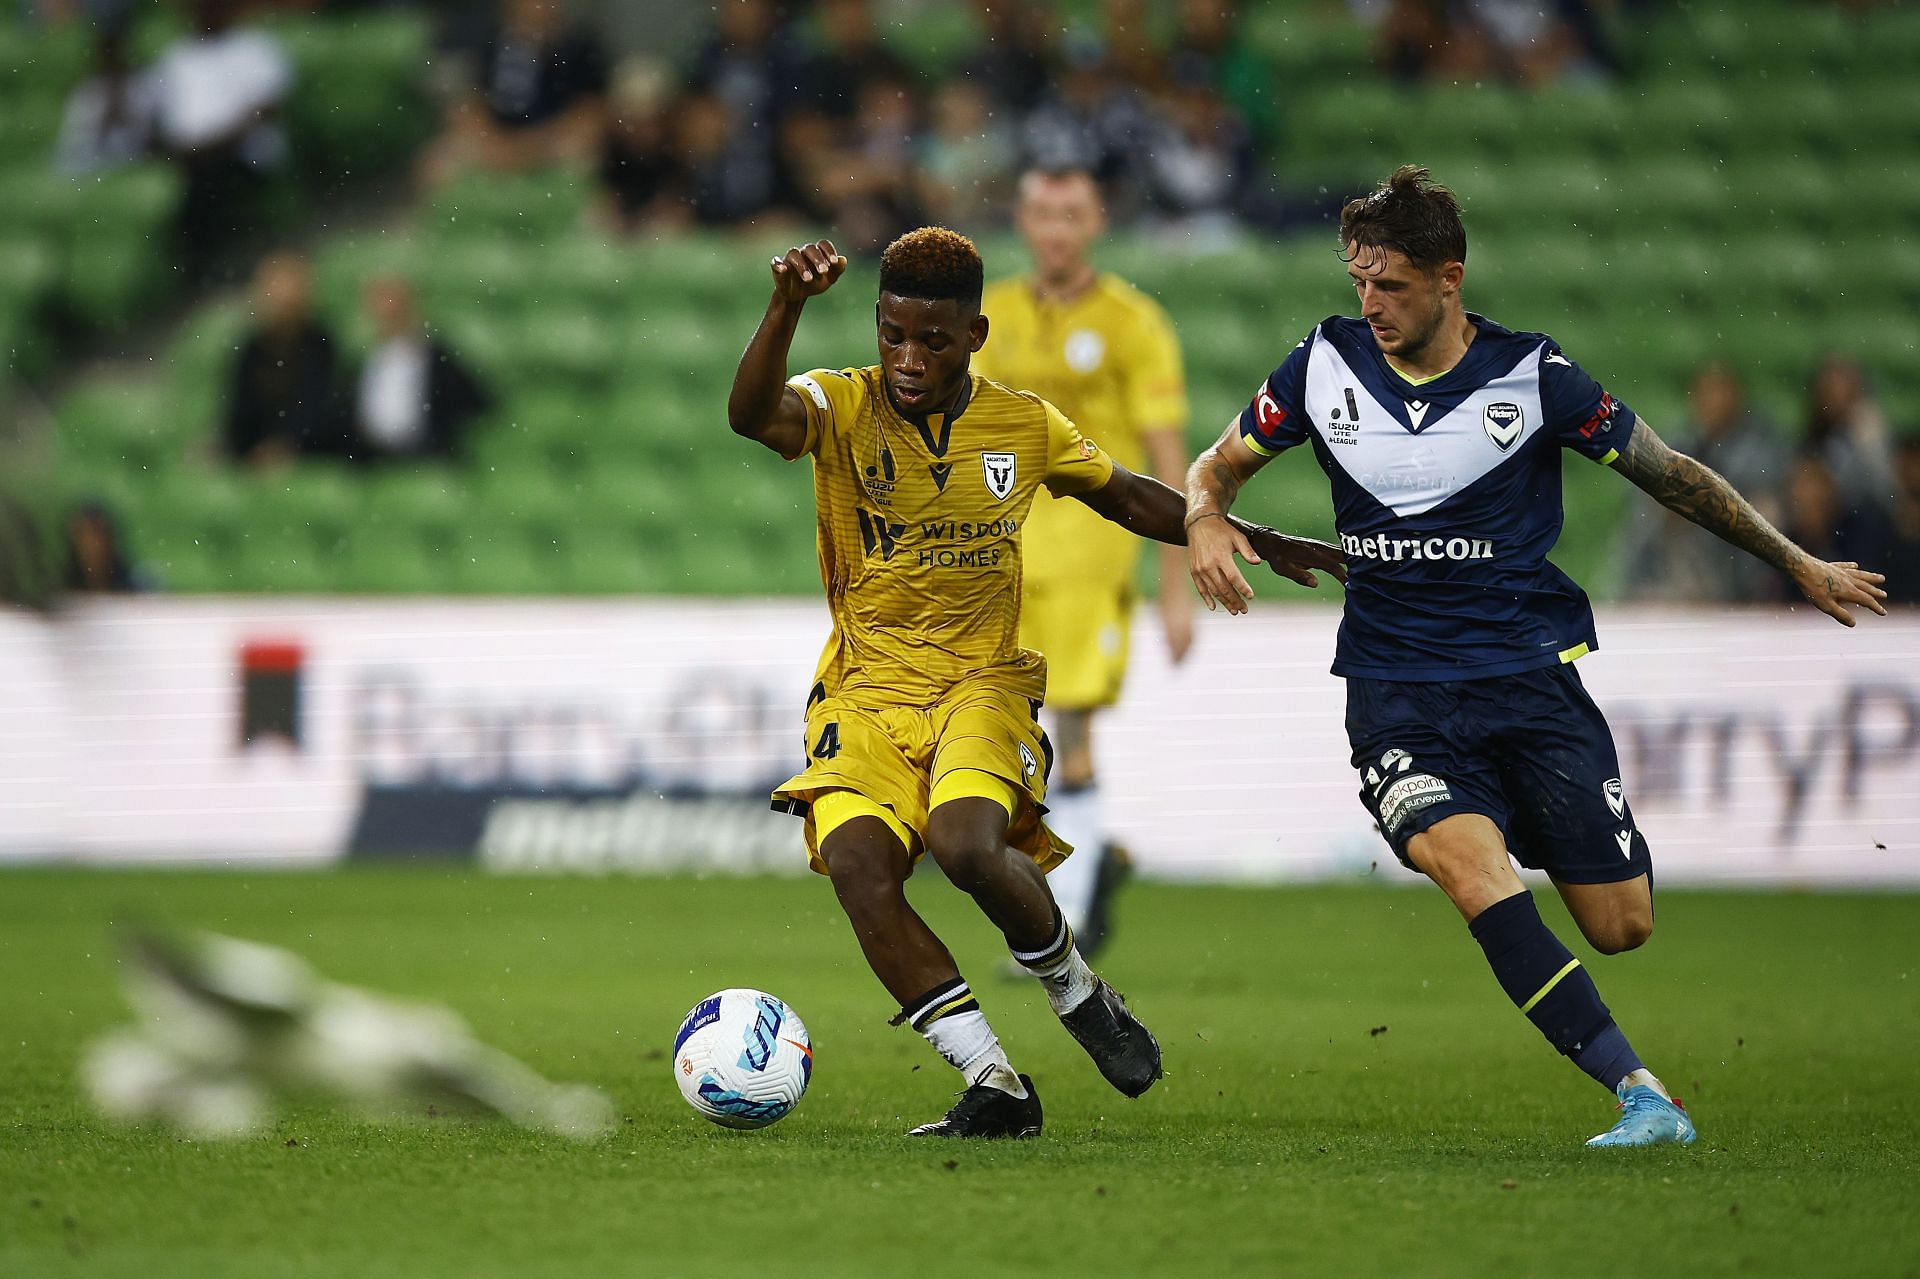 Melbourne Victory take on Macarthur FC this weekend